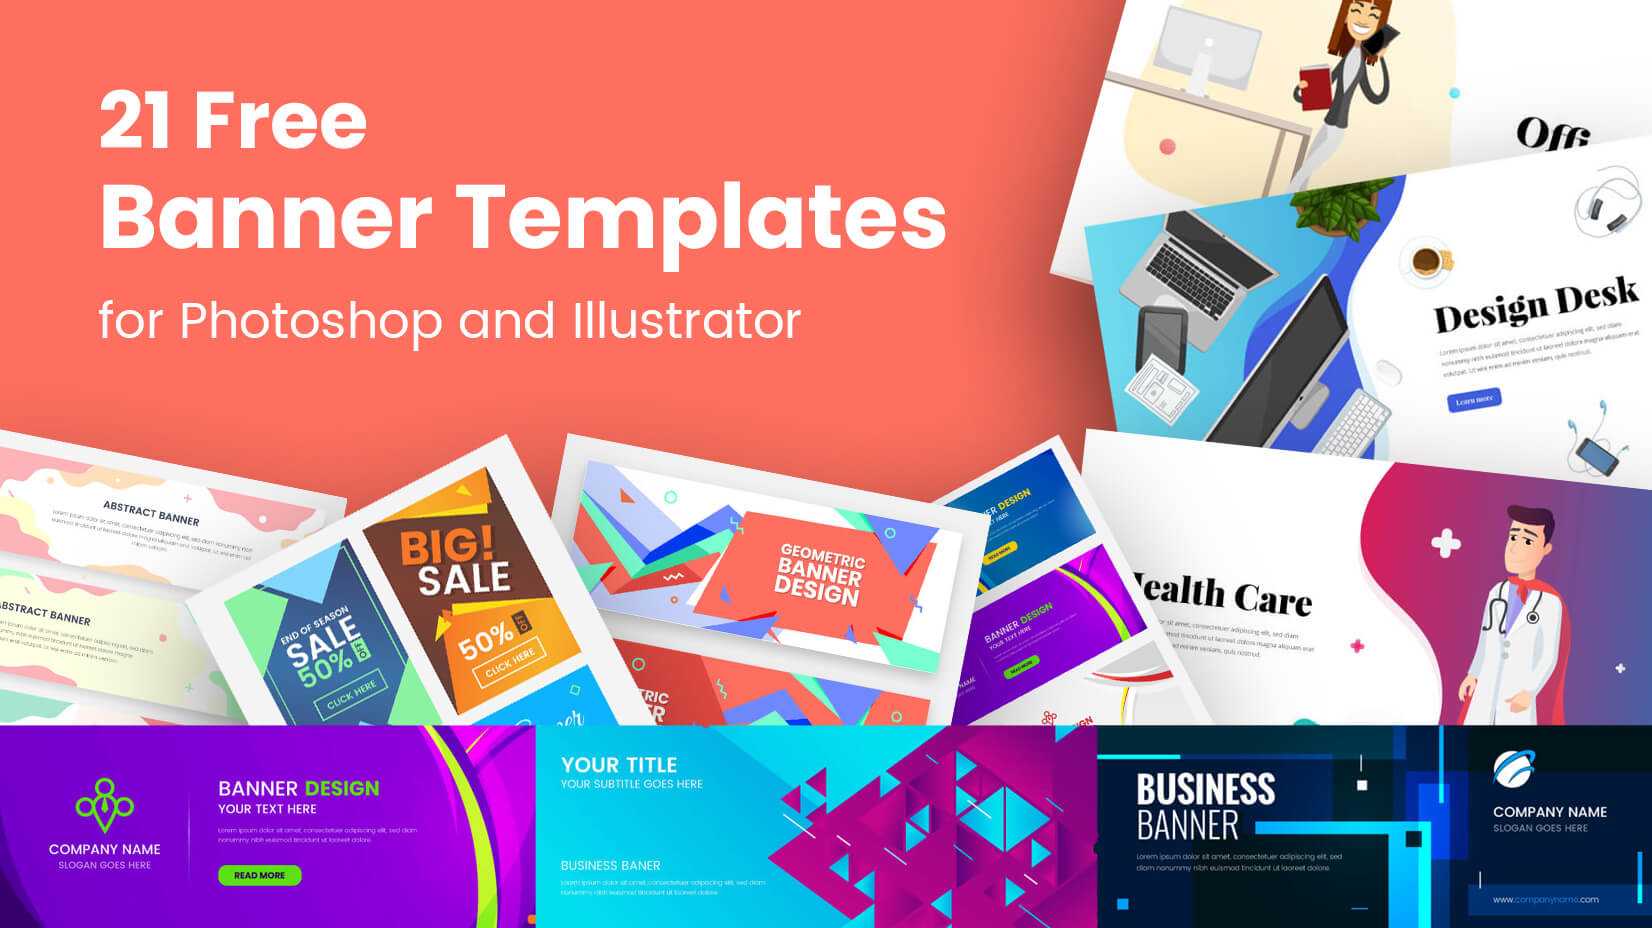 21 Free Banner Templates For Photoshop And Illustrator Intended For Vinyl Banner Design Templates